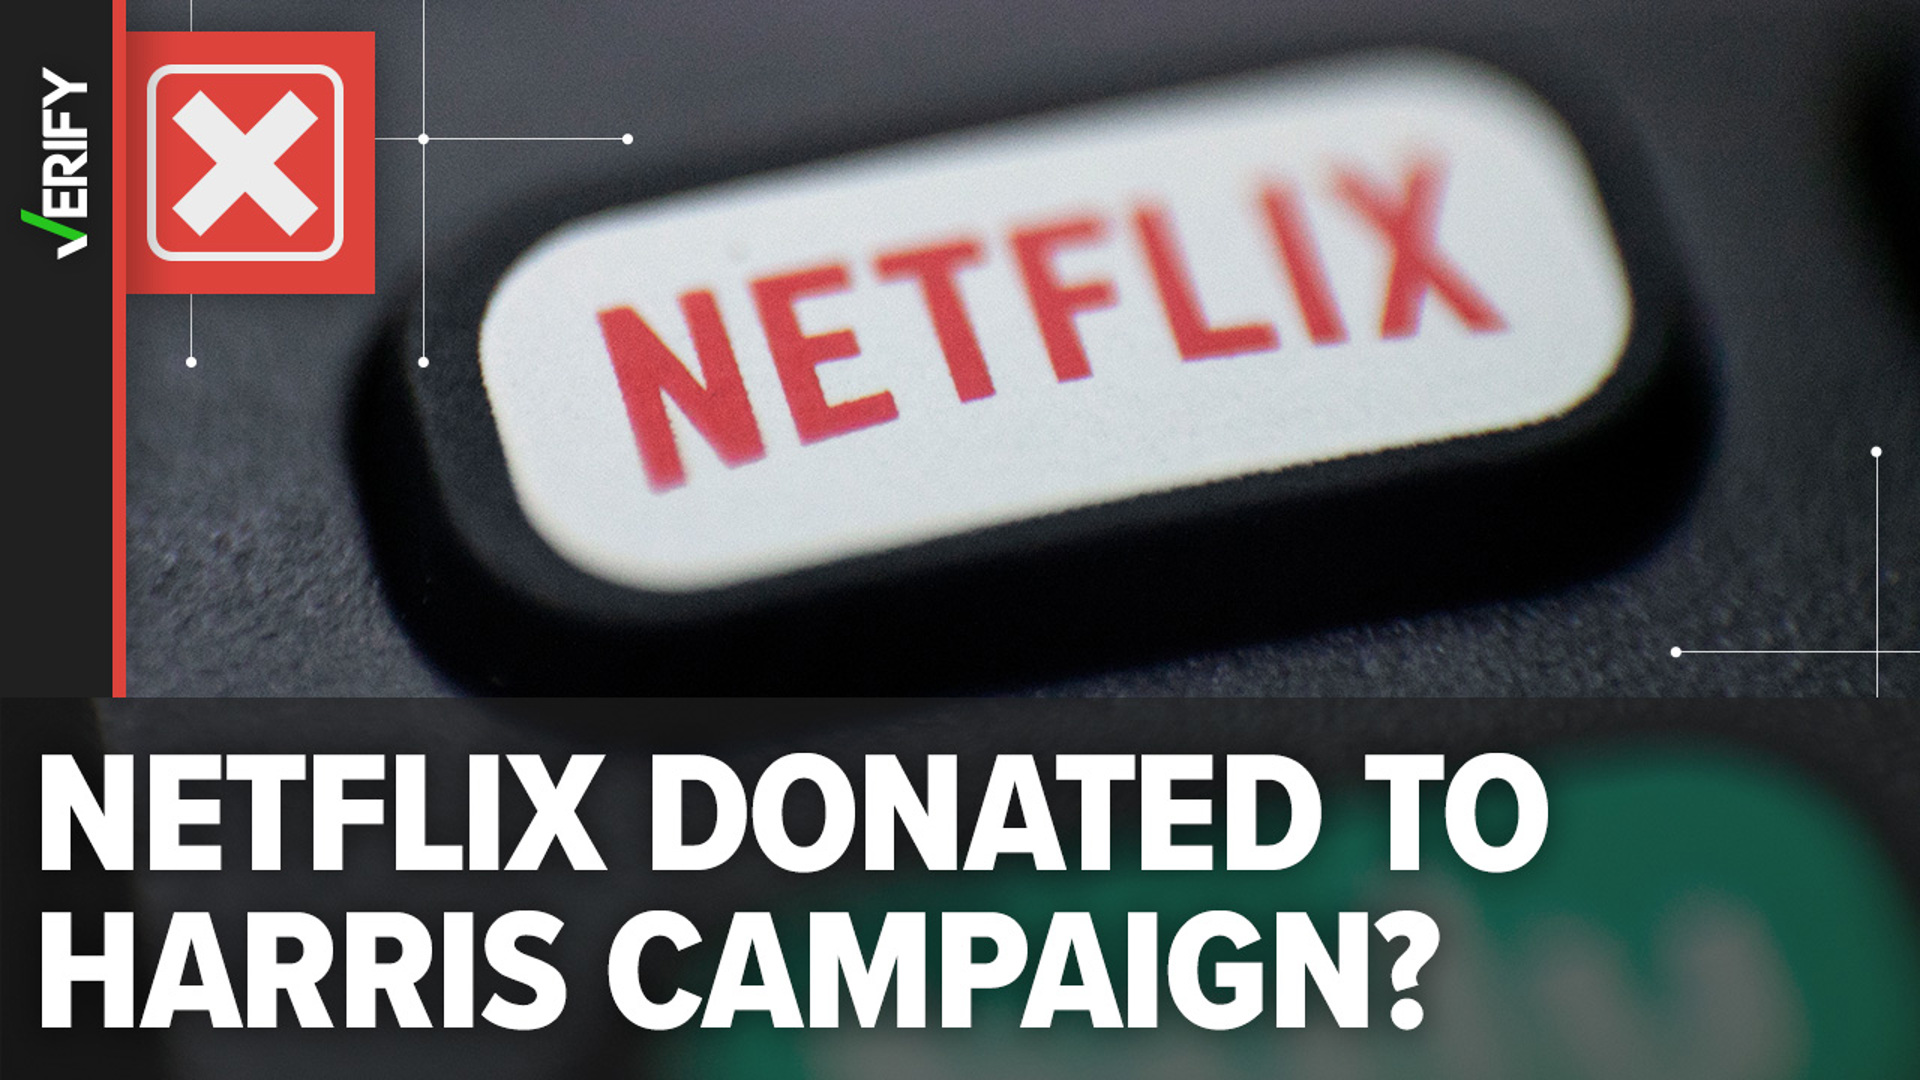 Netflix co-founder Reed Hastings made a personal donation of $7 million to a super PAC supporting Harris but the company itself did not.